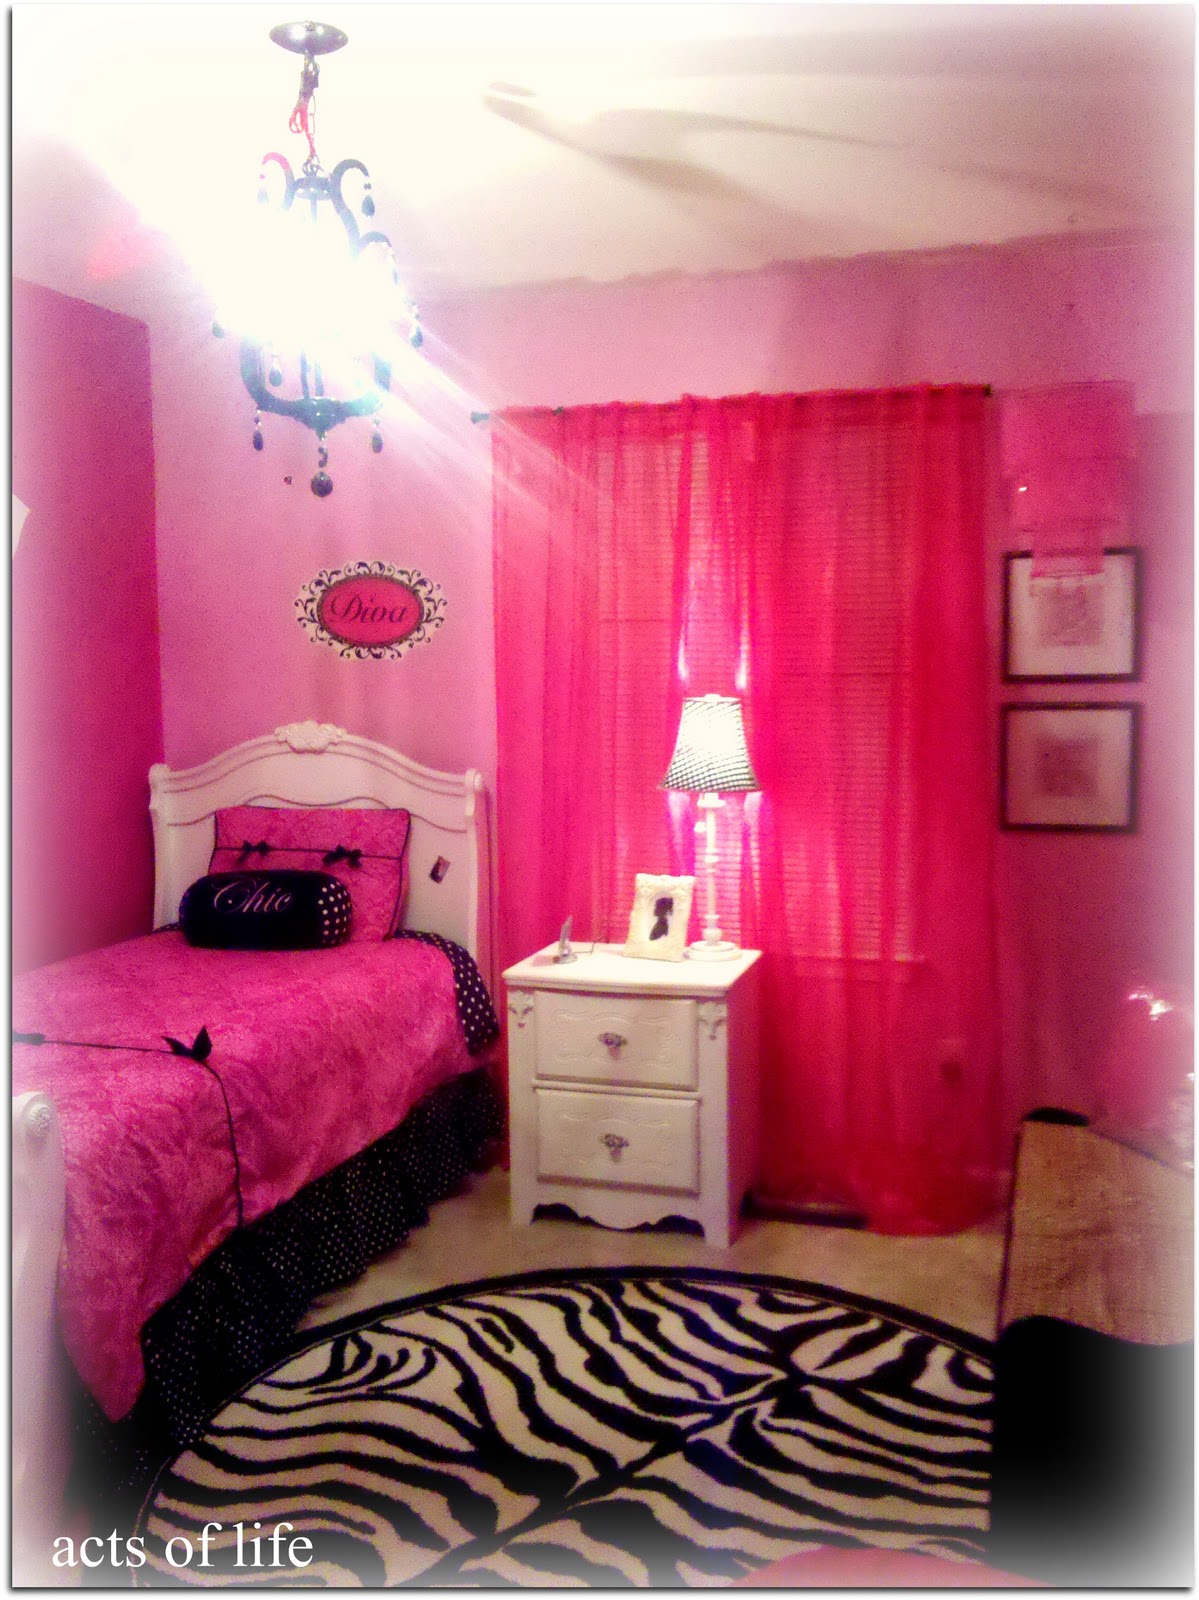 Acts of Life: Hot pink Bedroom! My daughters bedroom project